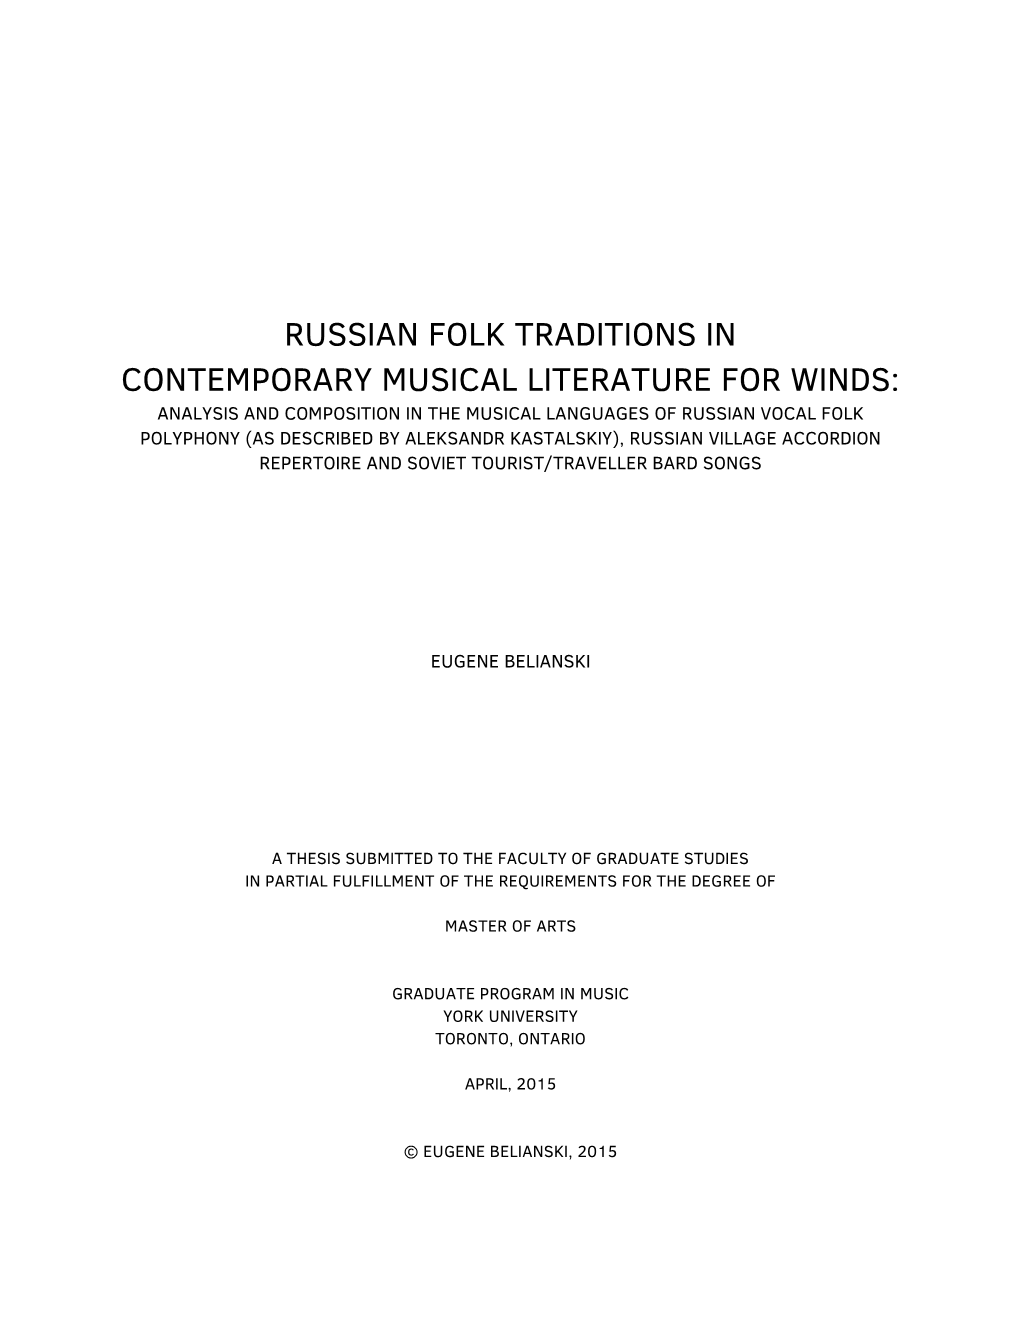 Russian Folk Traditions in Contemporary Musical